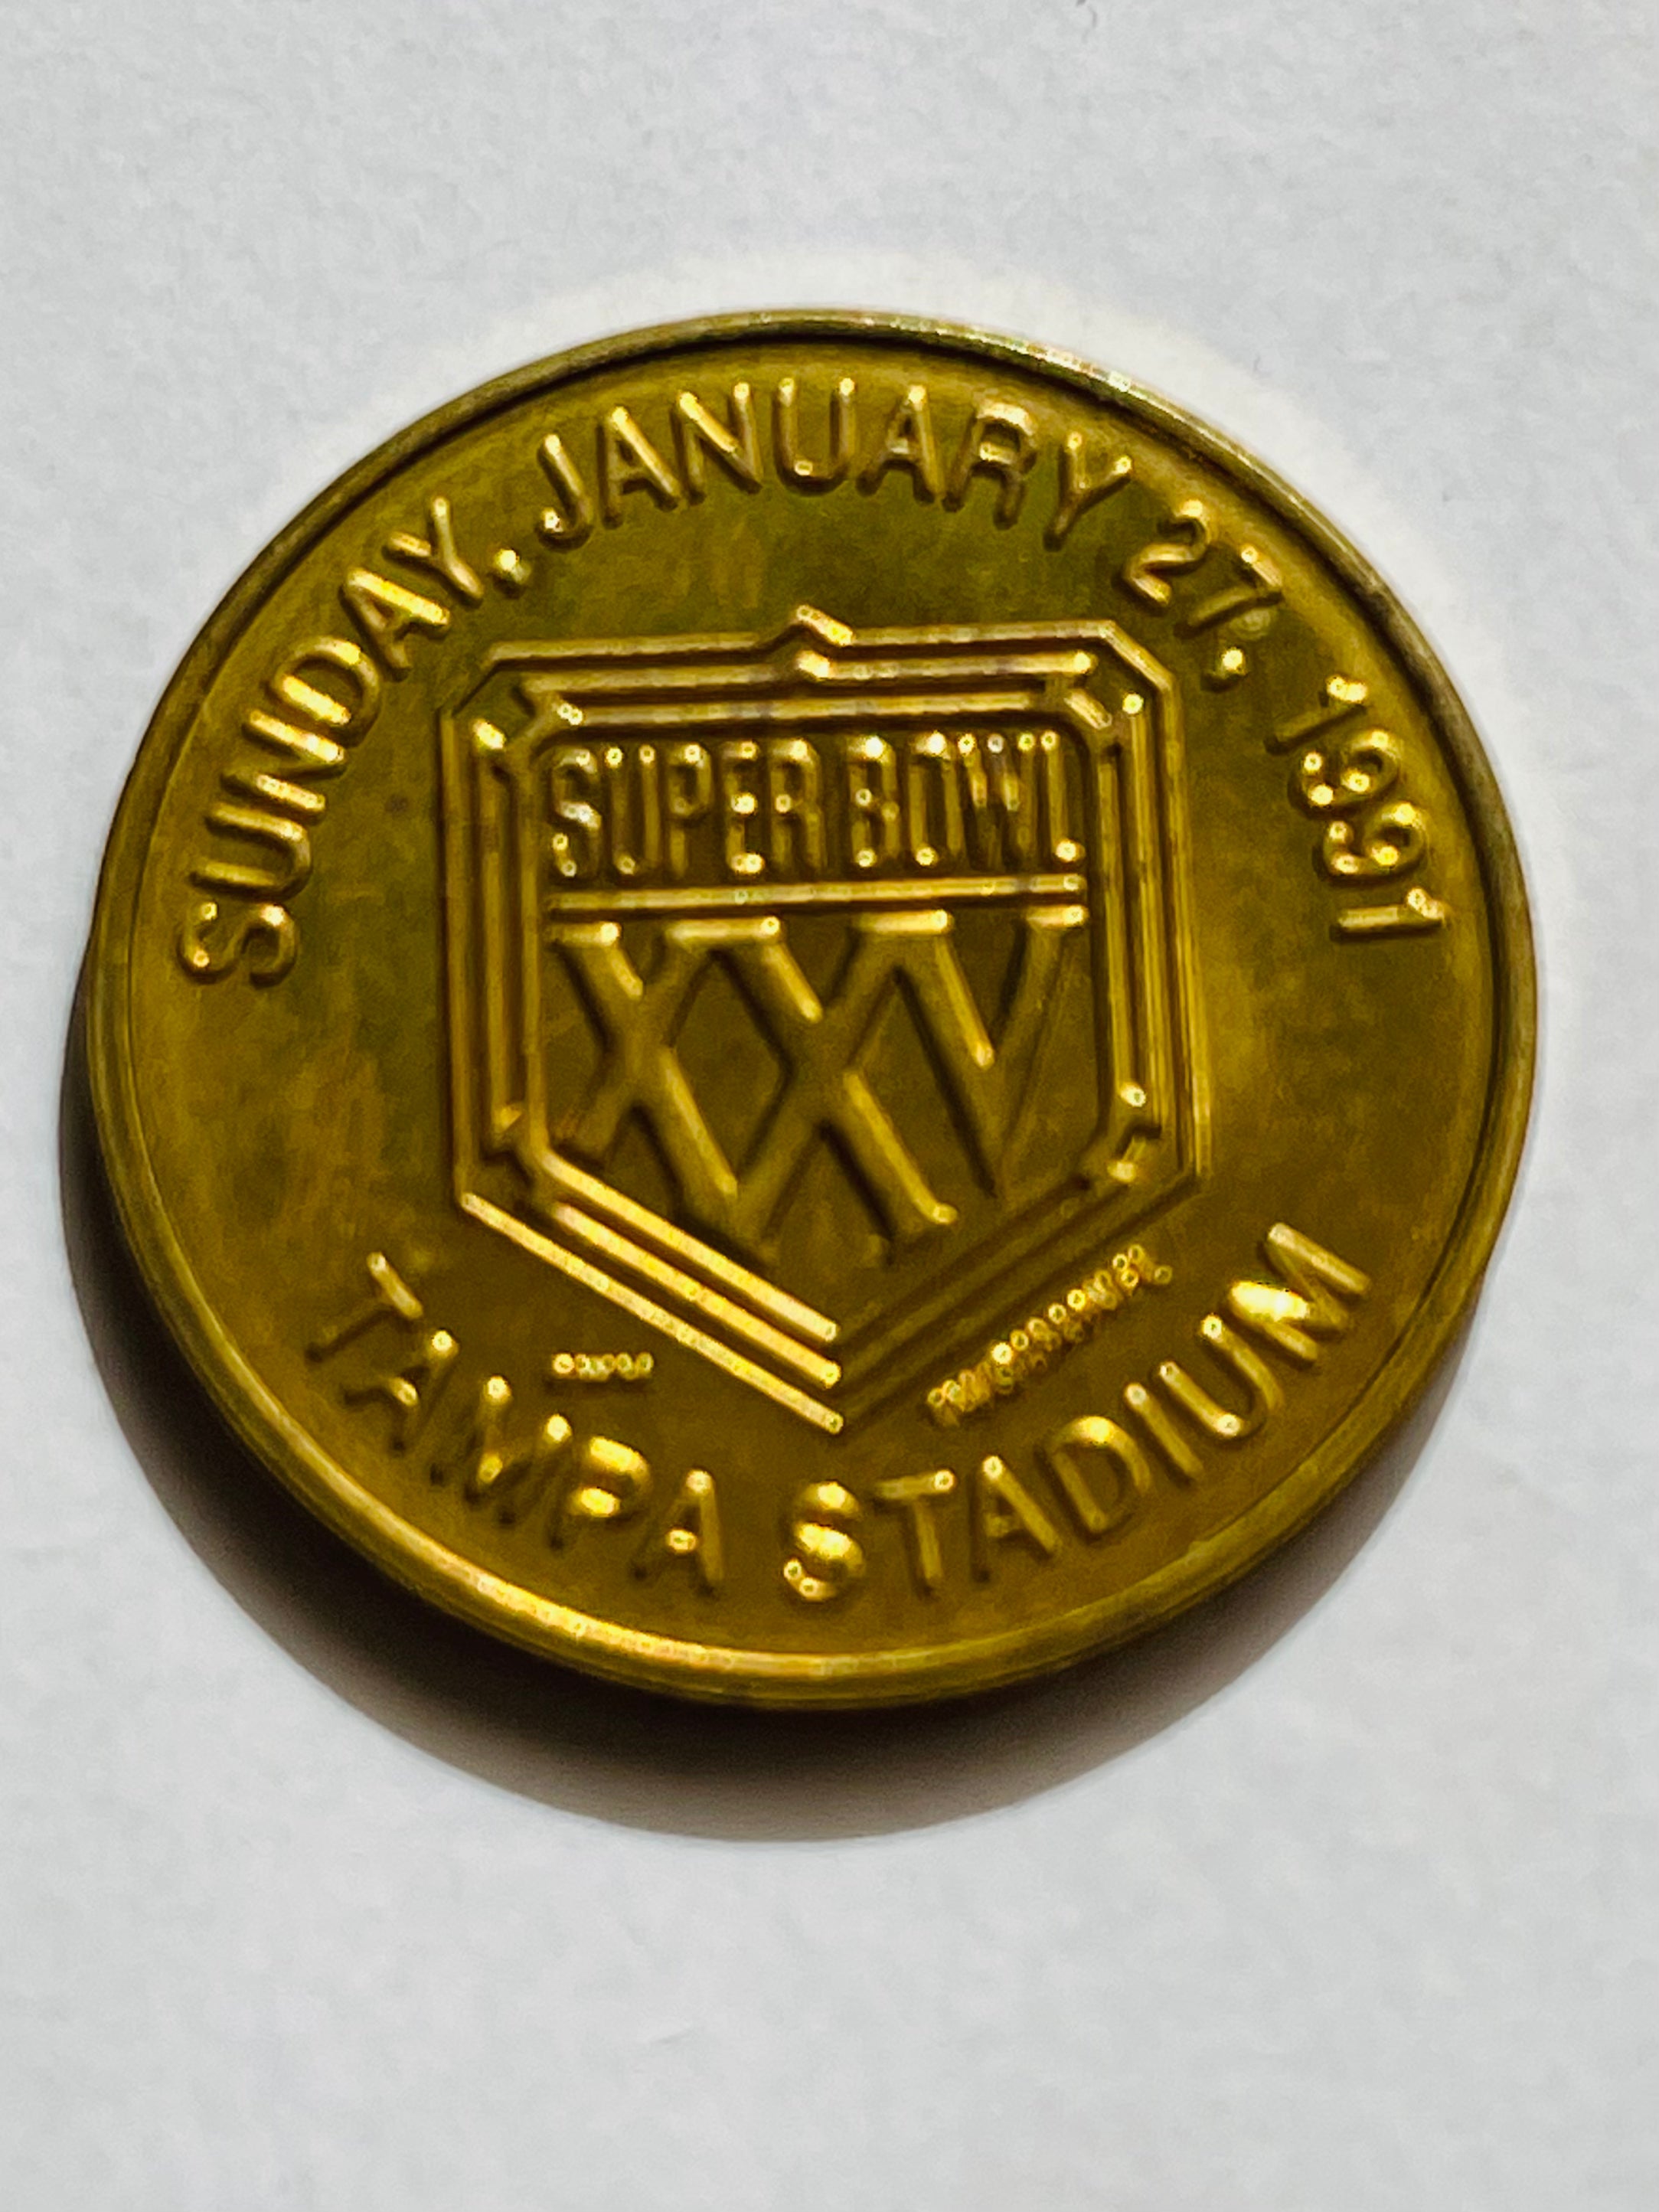 Super Bowl football rare limited issue coin 1991